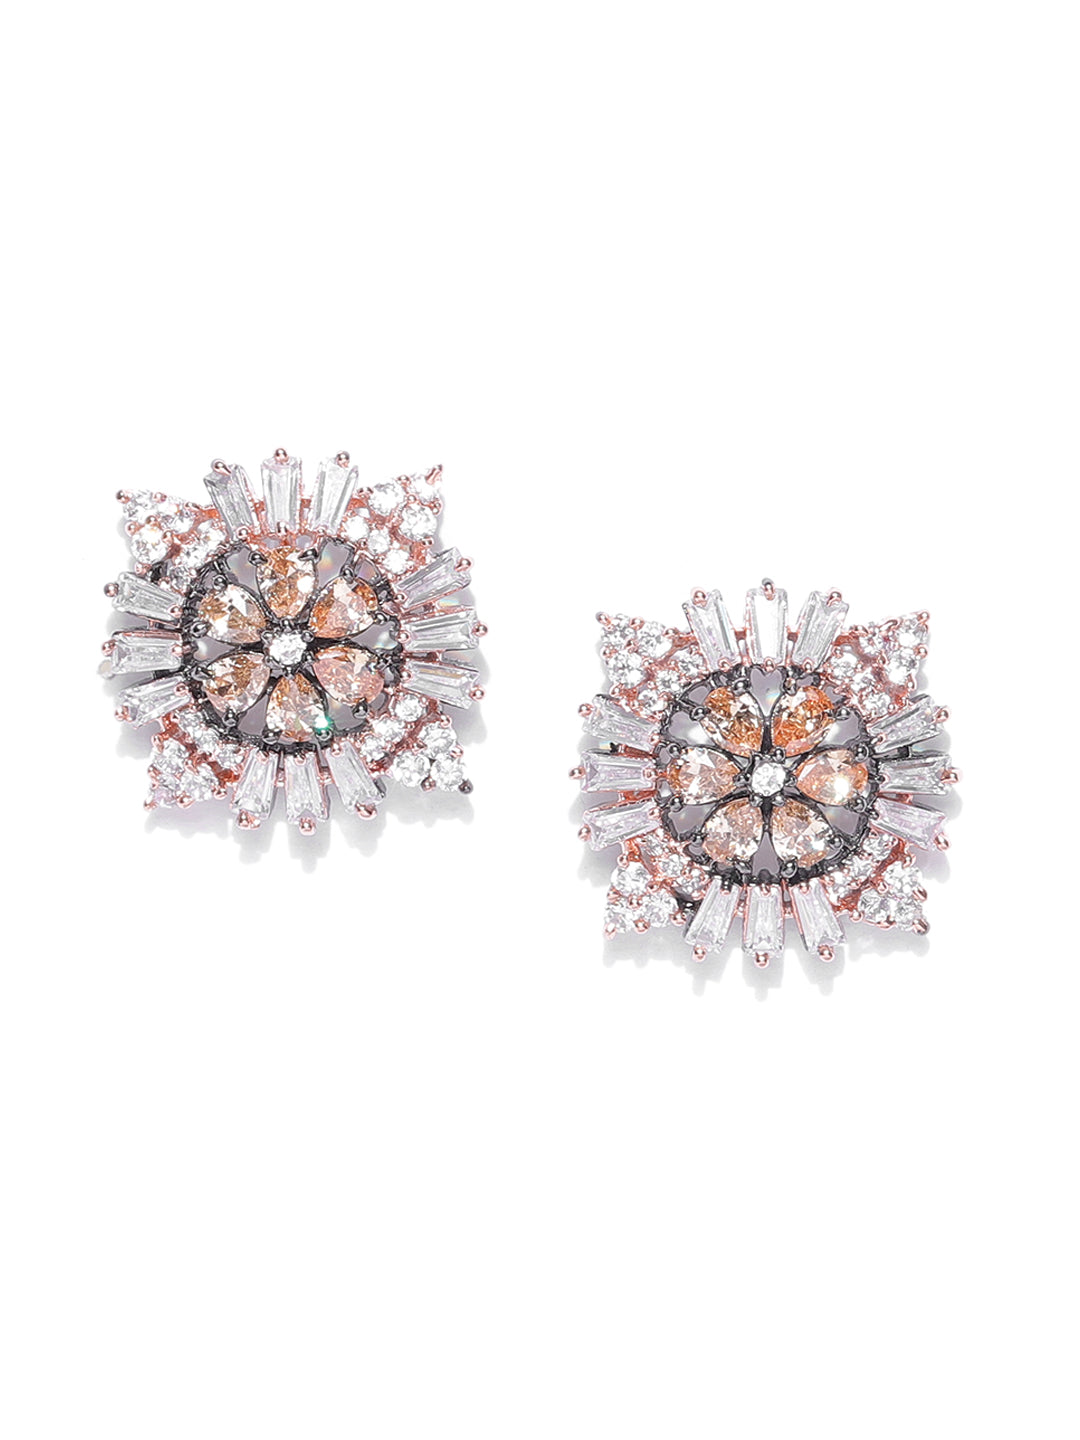 Stylish Rose Gold American Diamond Floral Shaped Stud Earring For Women And Girls